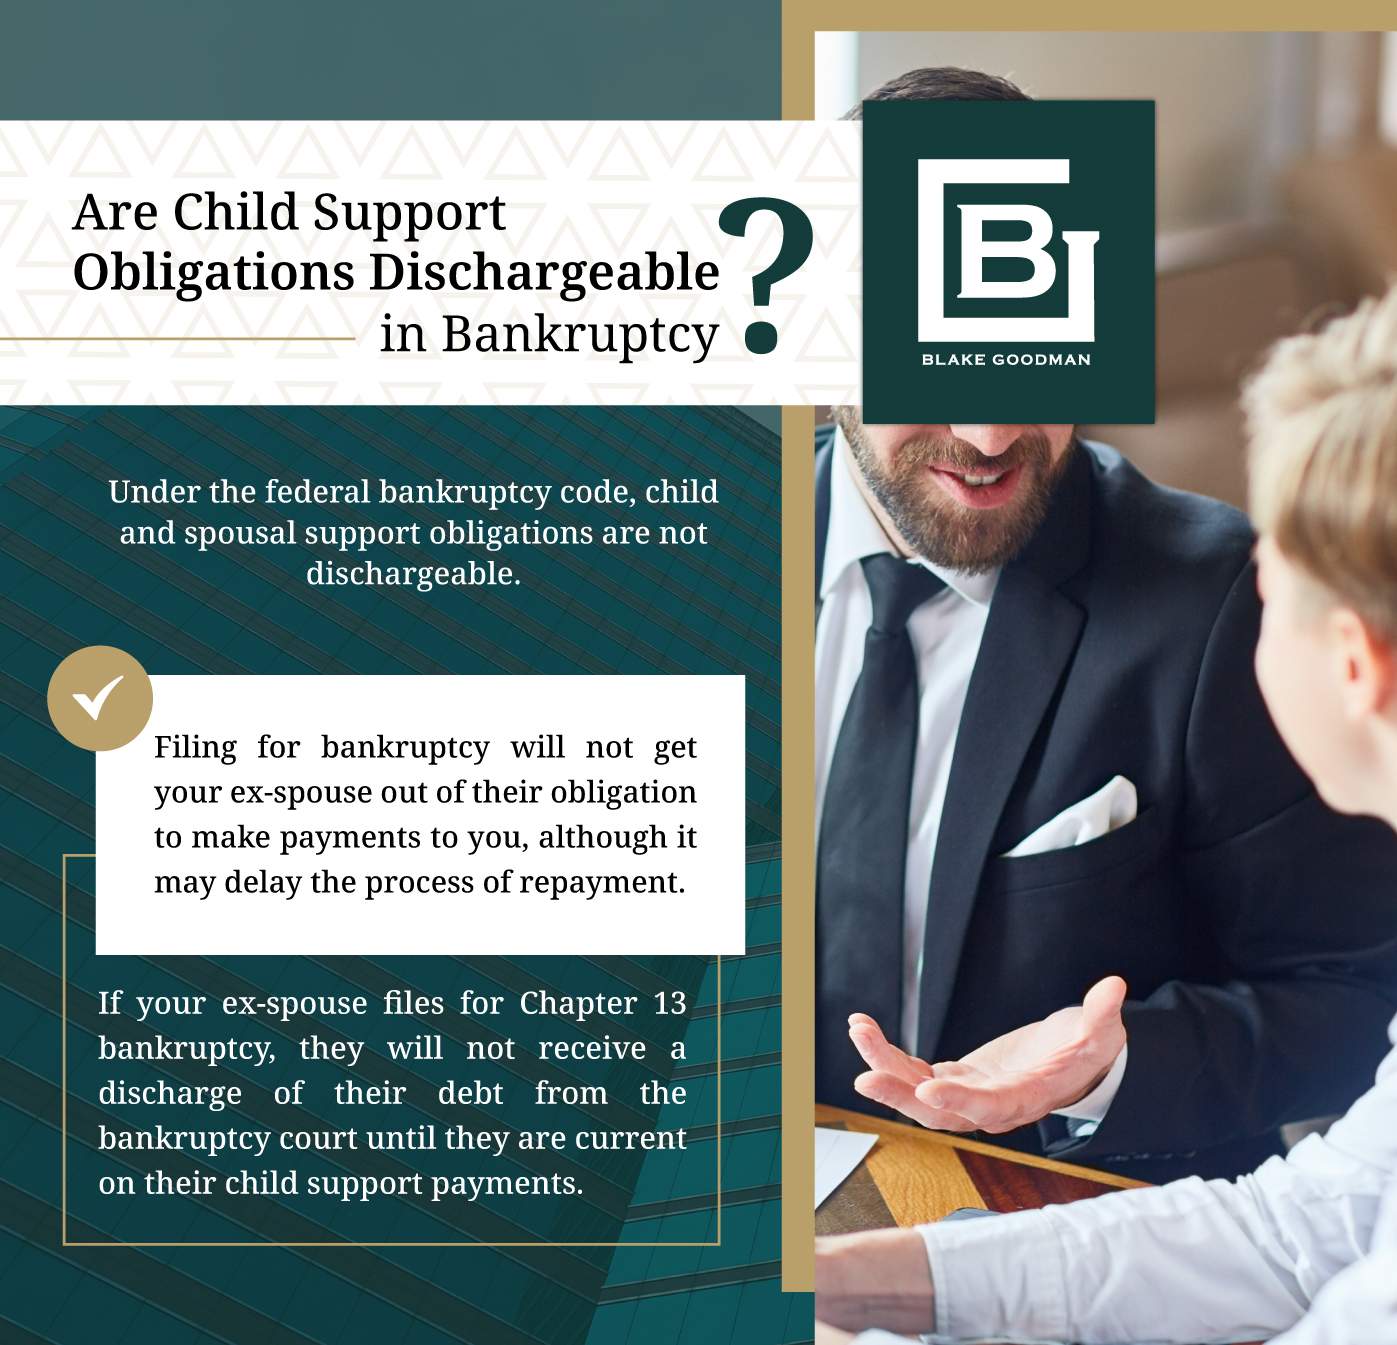 An infographic that shows if child support obligations are dischargeable in bankruptcy